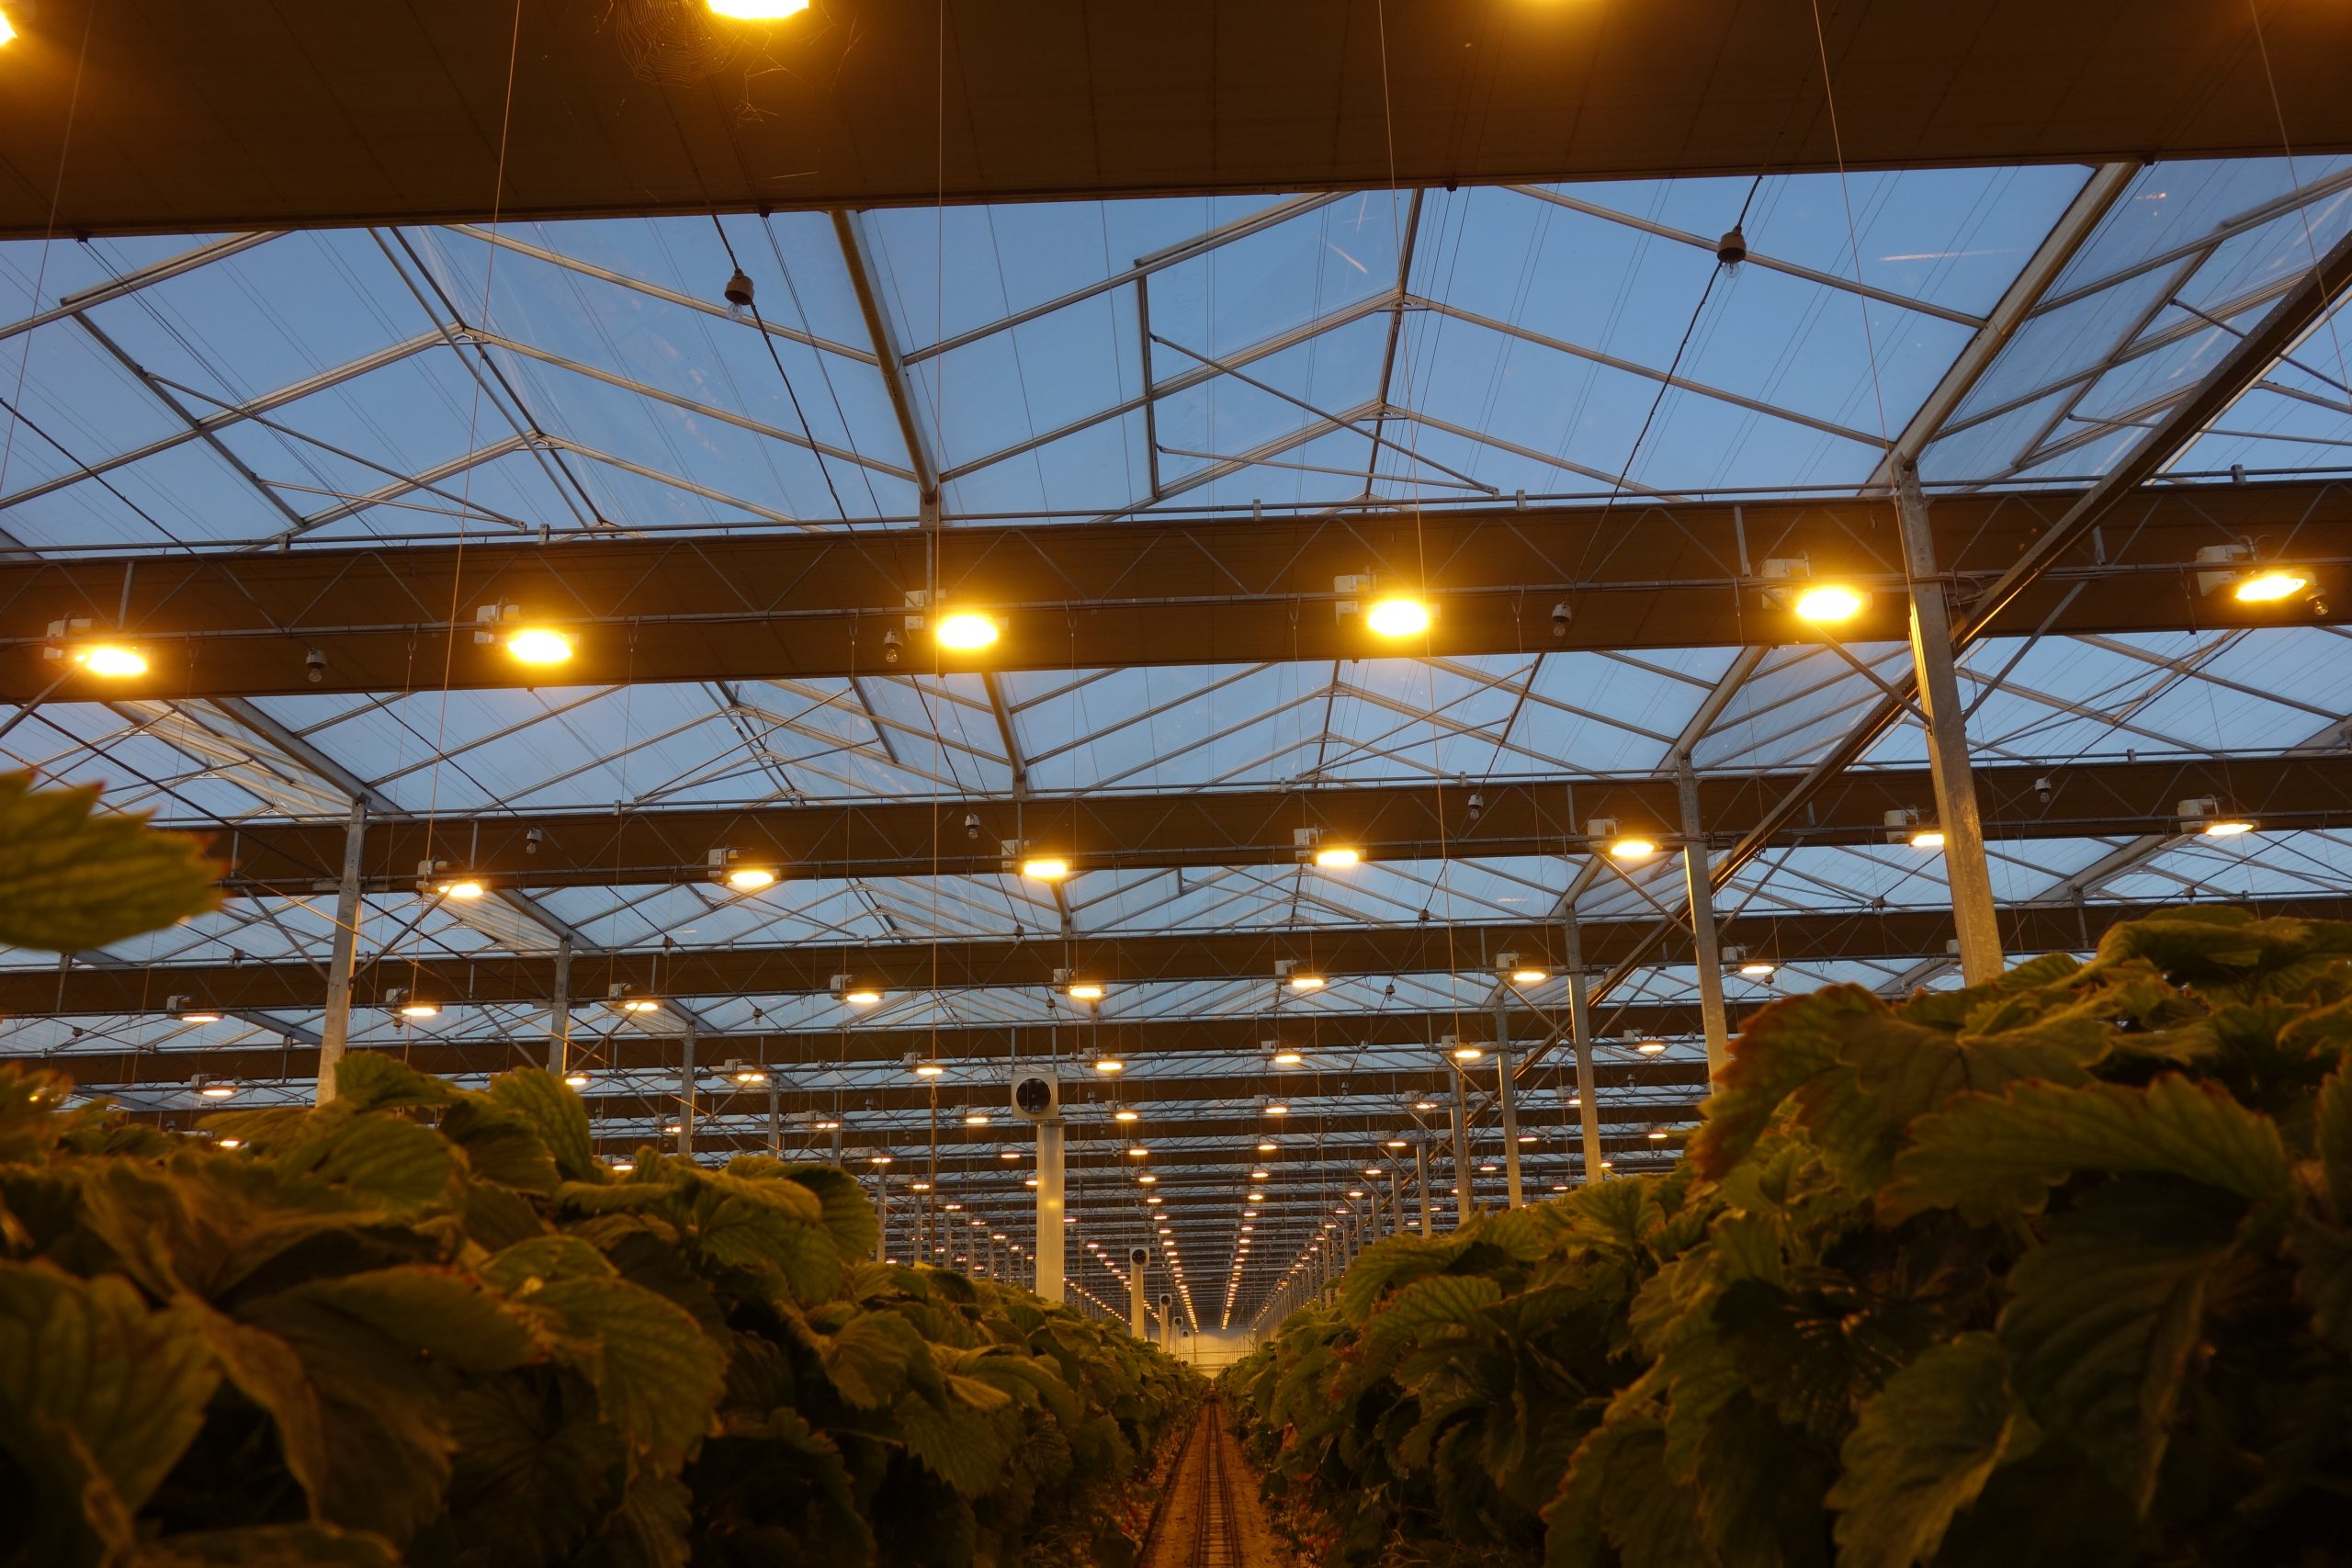 Assimilation lighting for horticulture